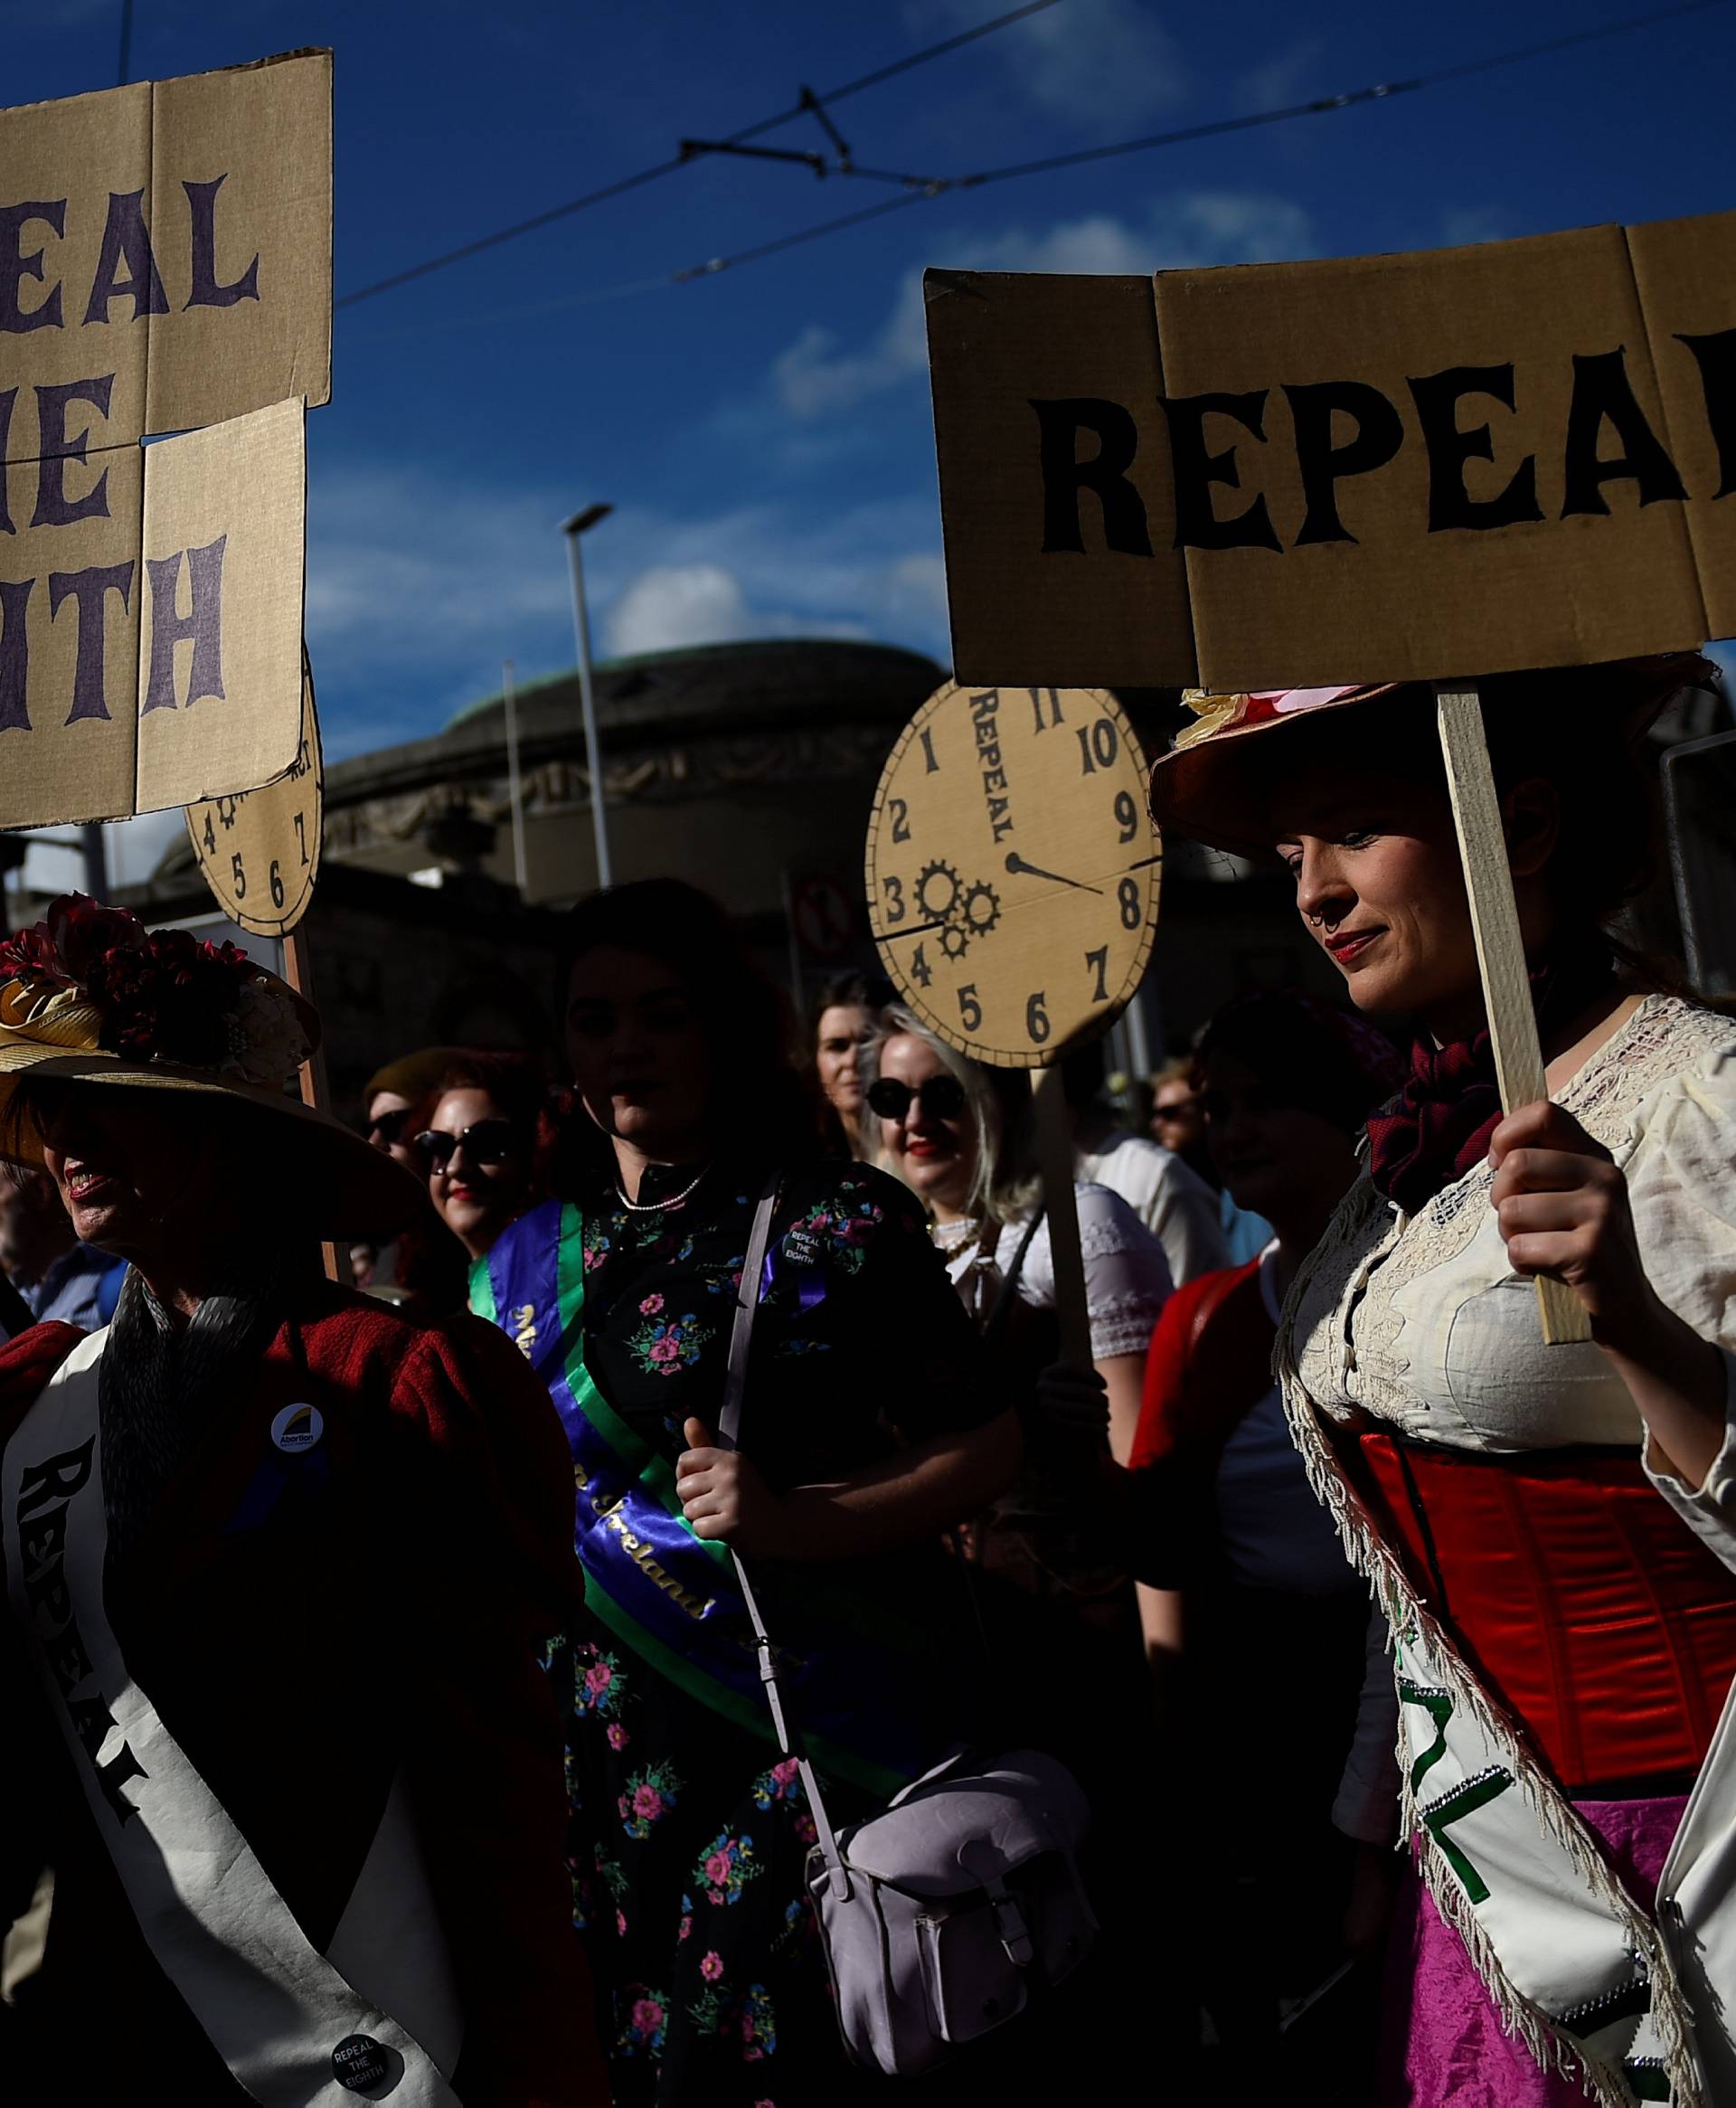 Demonstrators march for more liberal Irish abortion laws, in Dublin